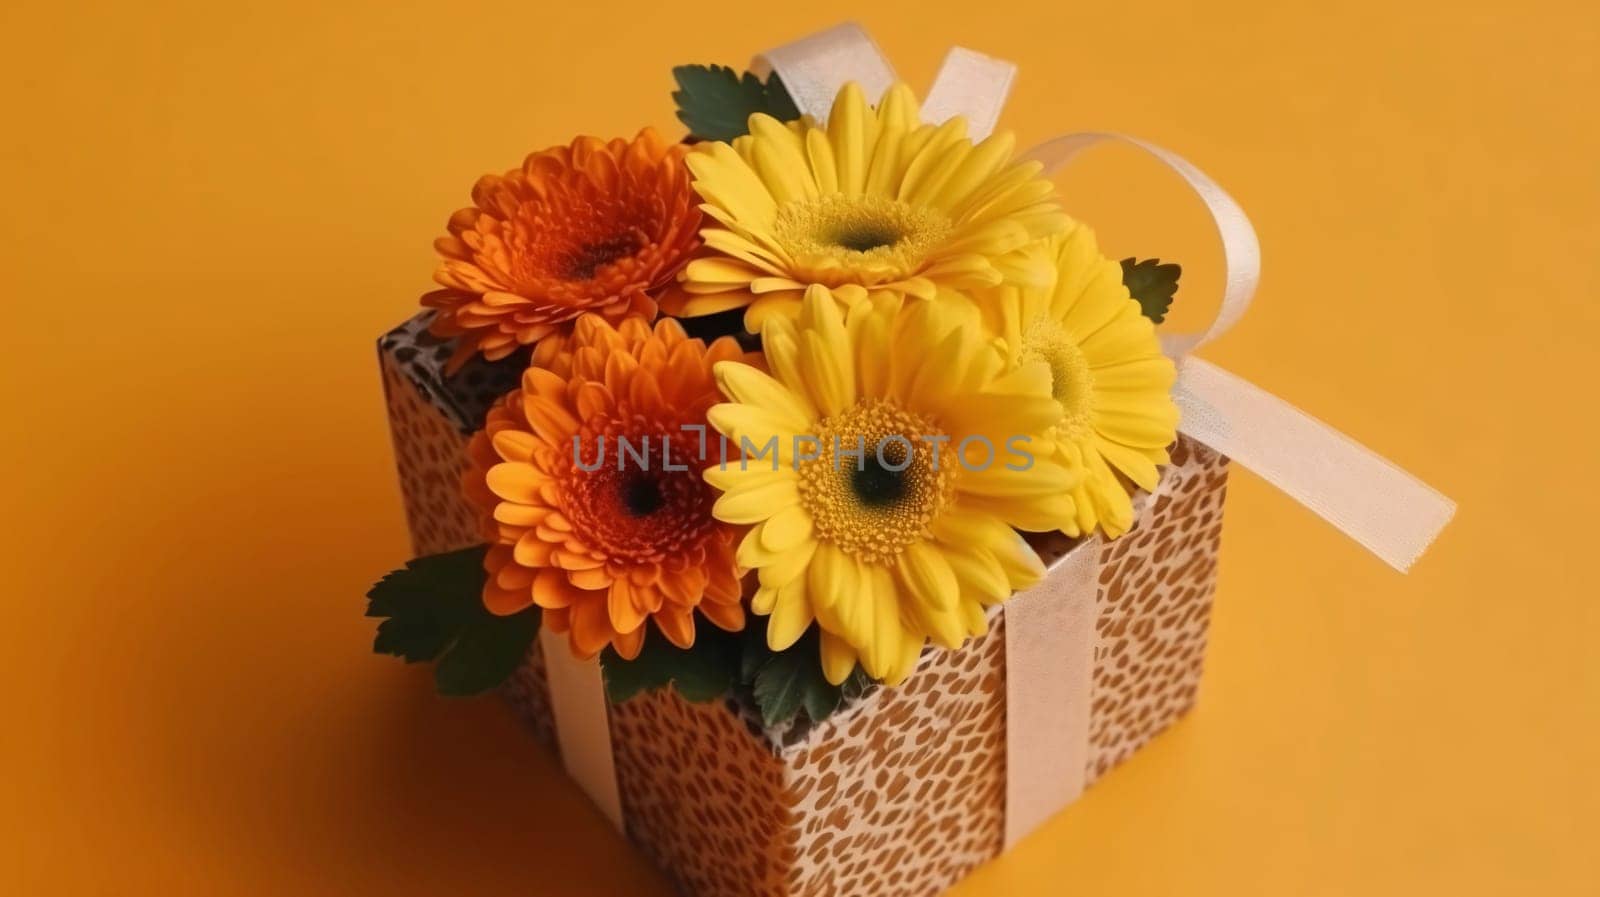 Yellow flowers as a gift with a bow, orange background.Valentine's Day banner with space for your own content. Heart as a symbol of affection and love.